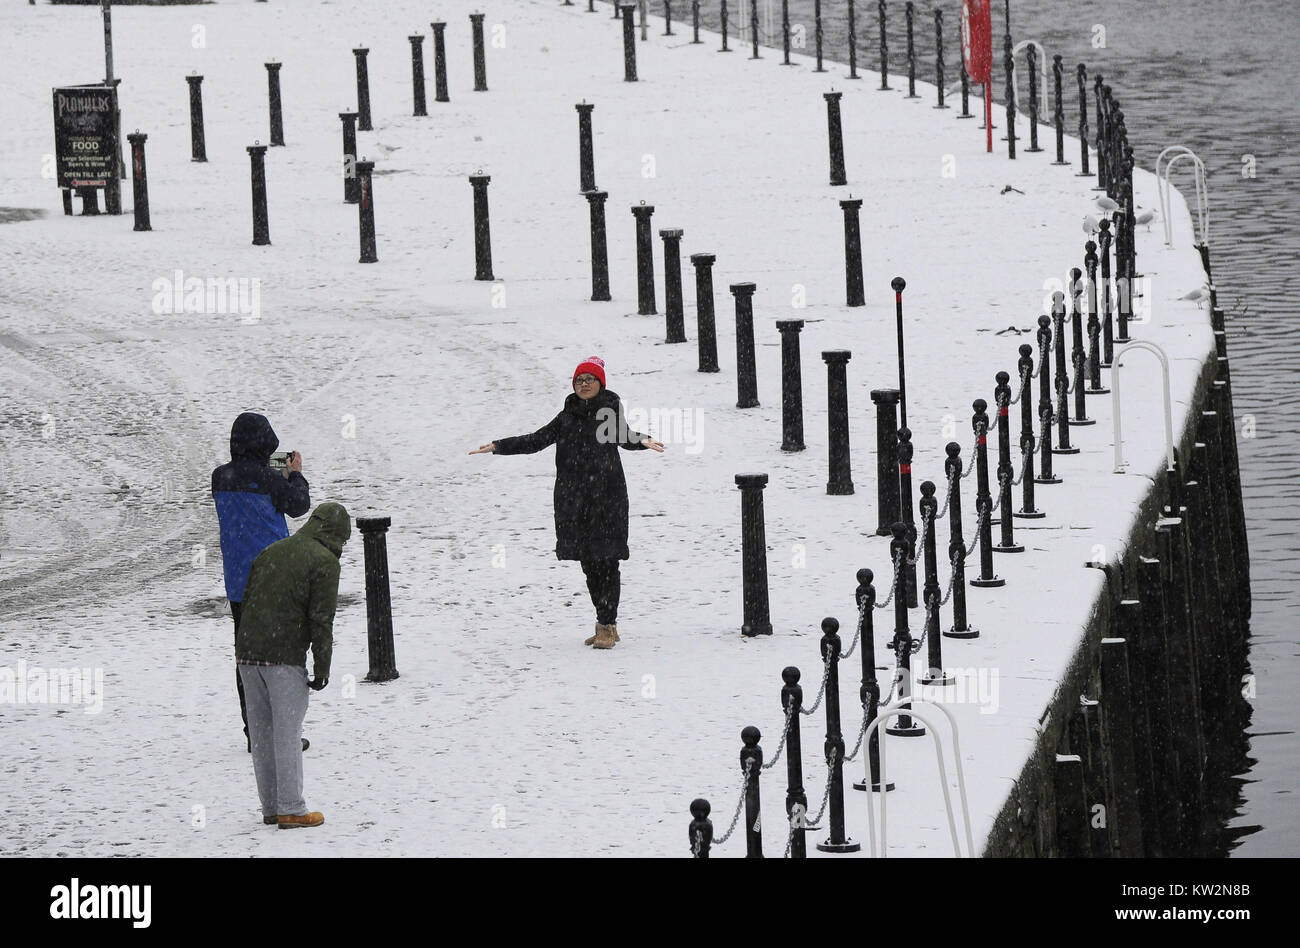 People take photos in the snow in York after Britain saw one of the coldest nights of the year with temperatures falling to minus 12.3C at Loch Glascarnoch in the Scottish Highlands overnight and heavy snow expected over part of the north of England. Stock Photo